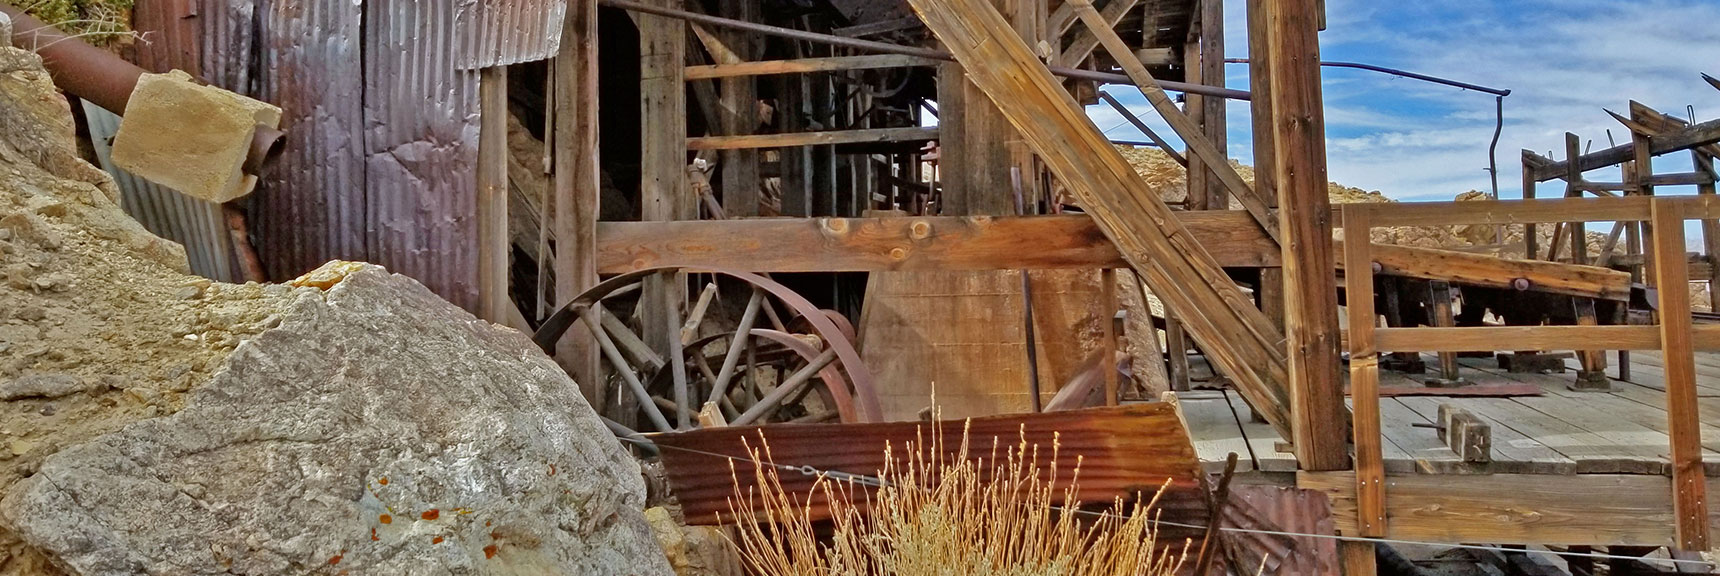 Water Wheel Machinery for Pulverizing Raw Oar to Extract Gold? | Skidoo Stamp Mill, Panamint Mountains, Death Valley National Park, CA